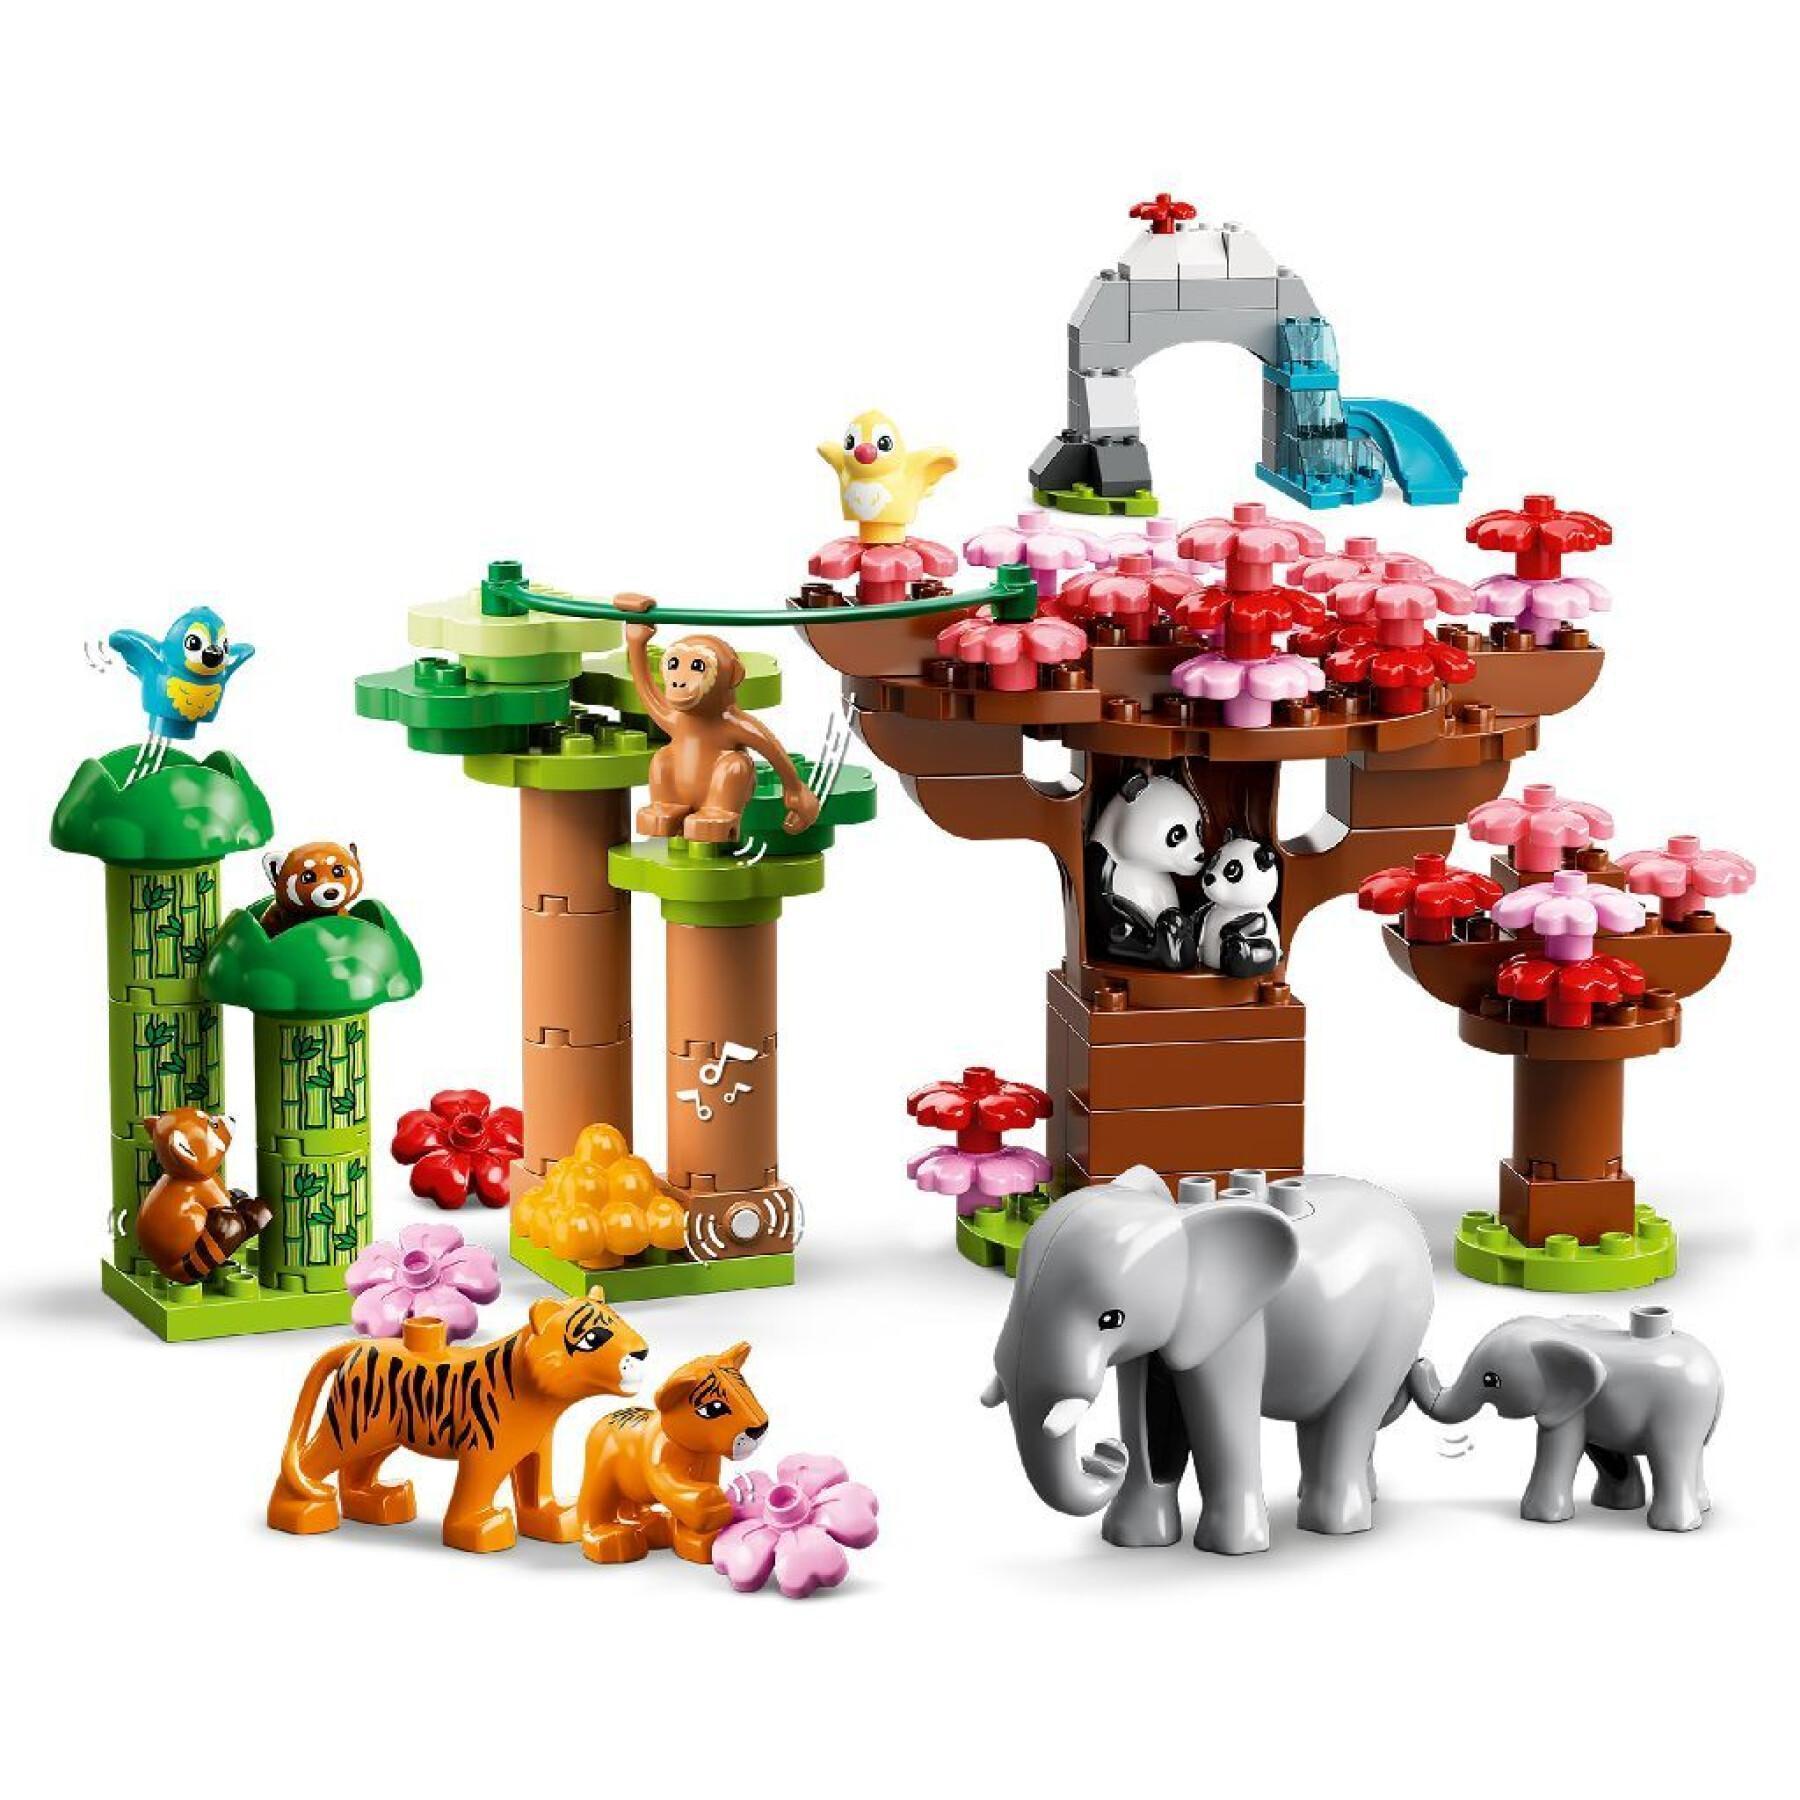 Animaux sauvages Lego Asie Duplo